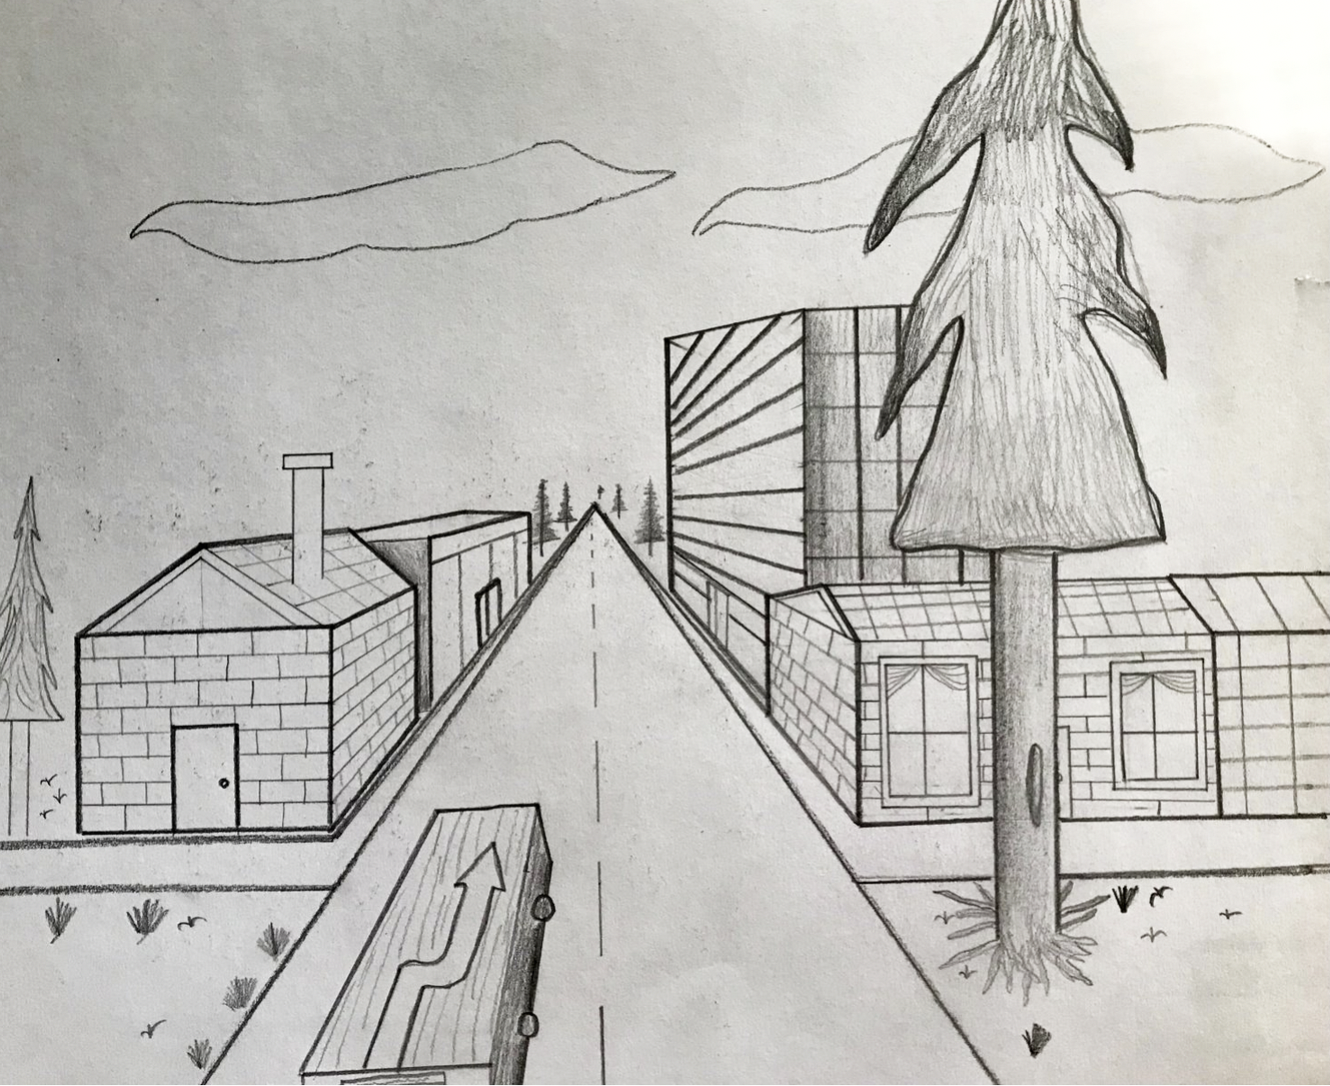 Drawing of road surrounded by house, tree and with clouds in the sky